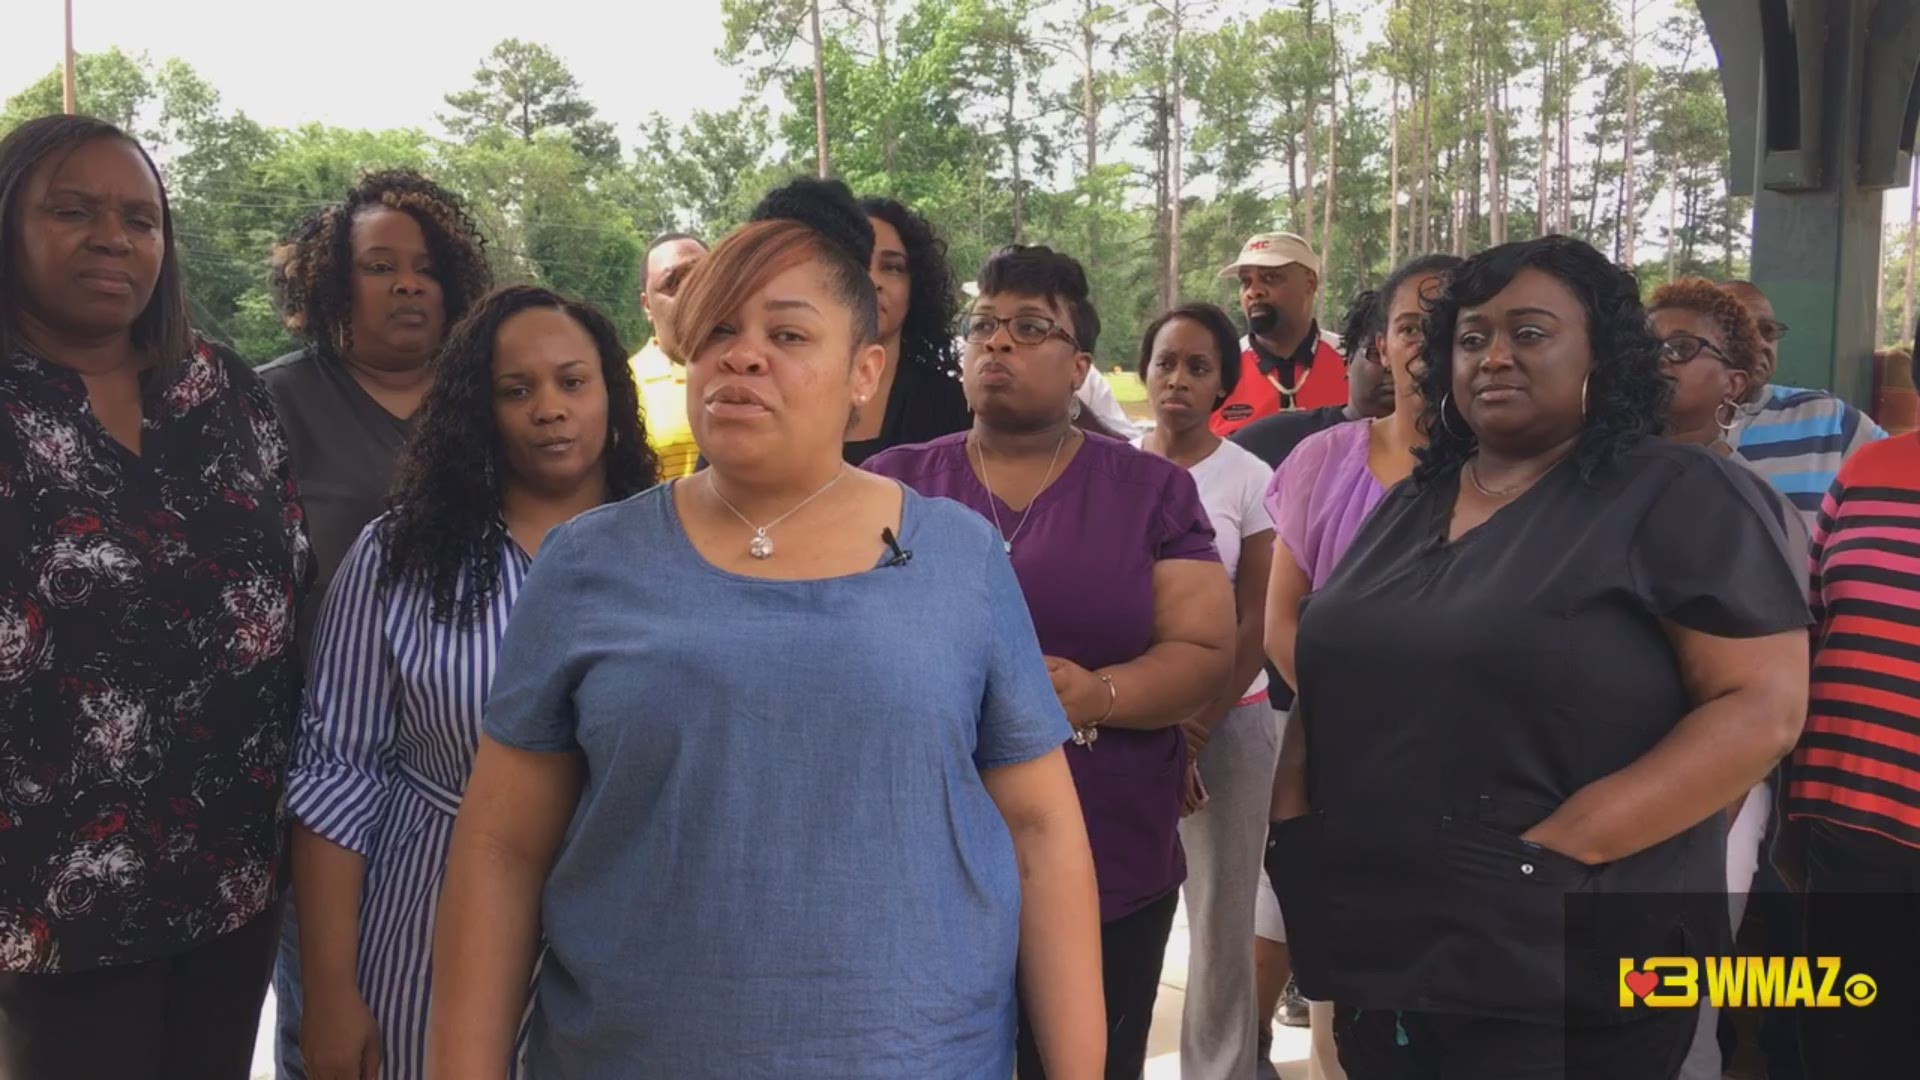 Valleria Wells, a parent of a Baldwin County High School student, talks about some students, including her child, being forbidden to participate in the school's graduation ceremony following a senior prank.